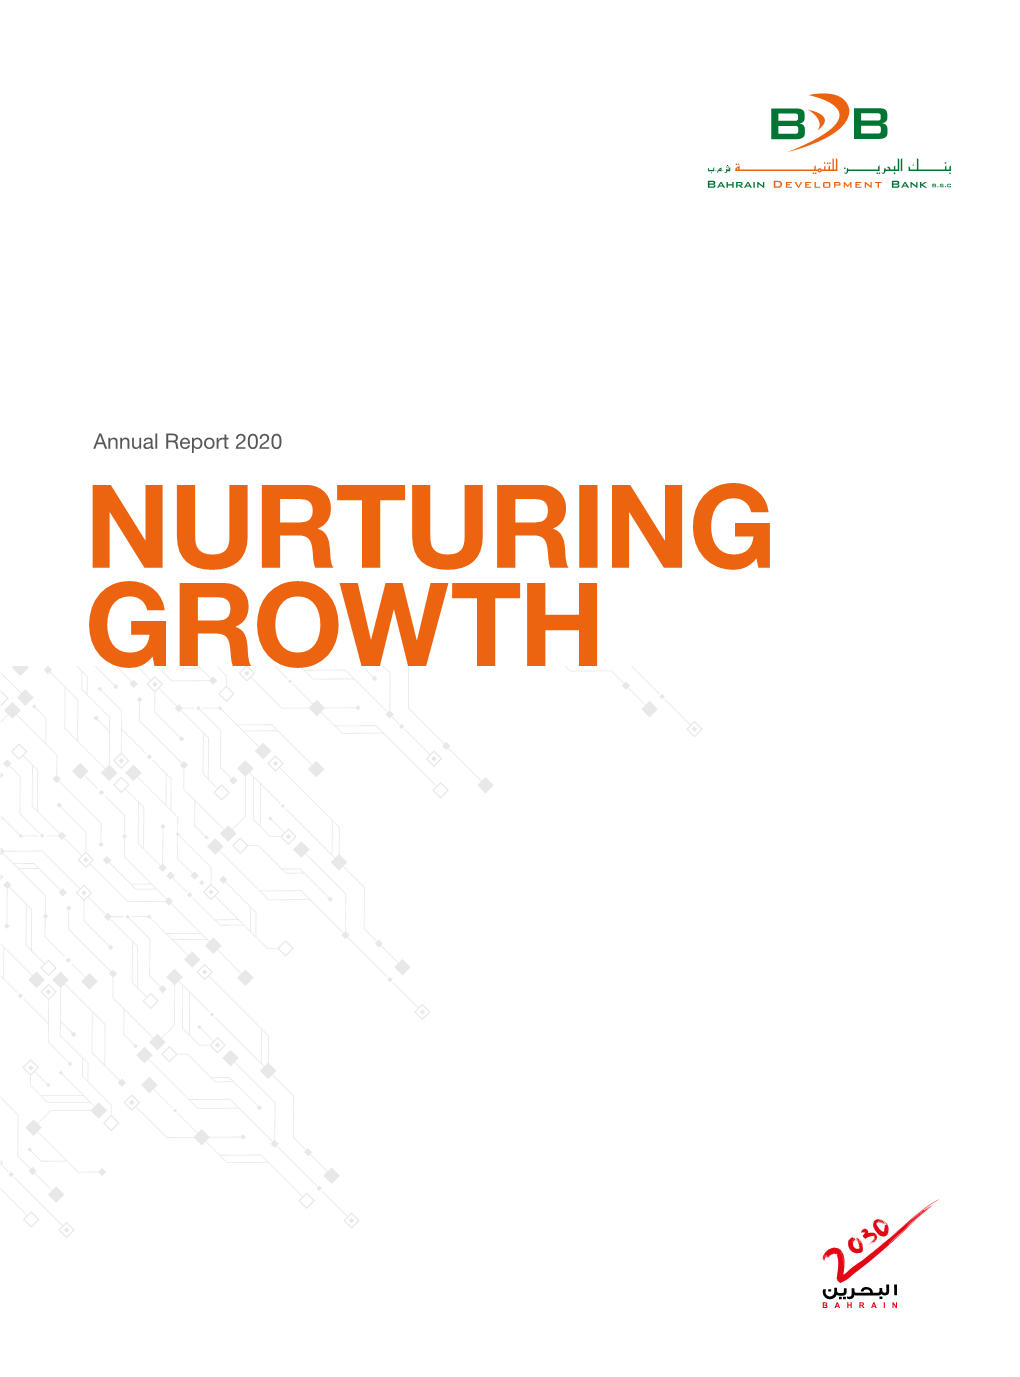 Annual Report 2020 NURTURING GROWTH Contents